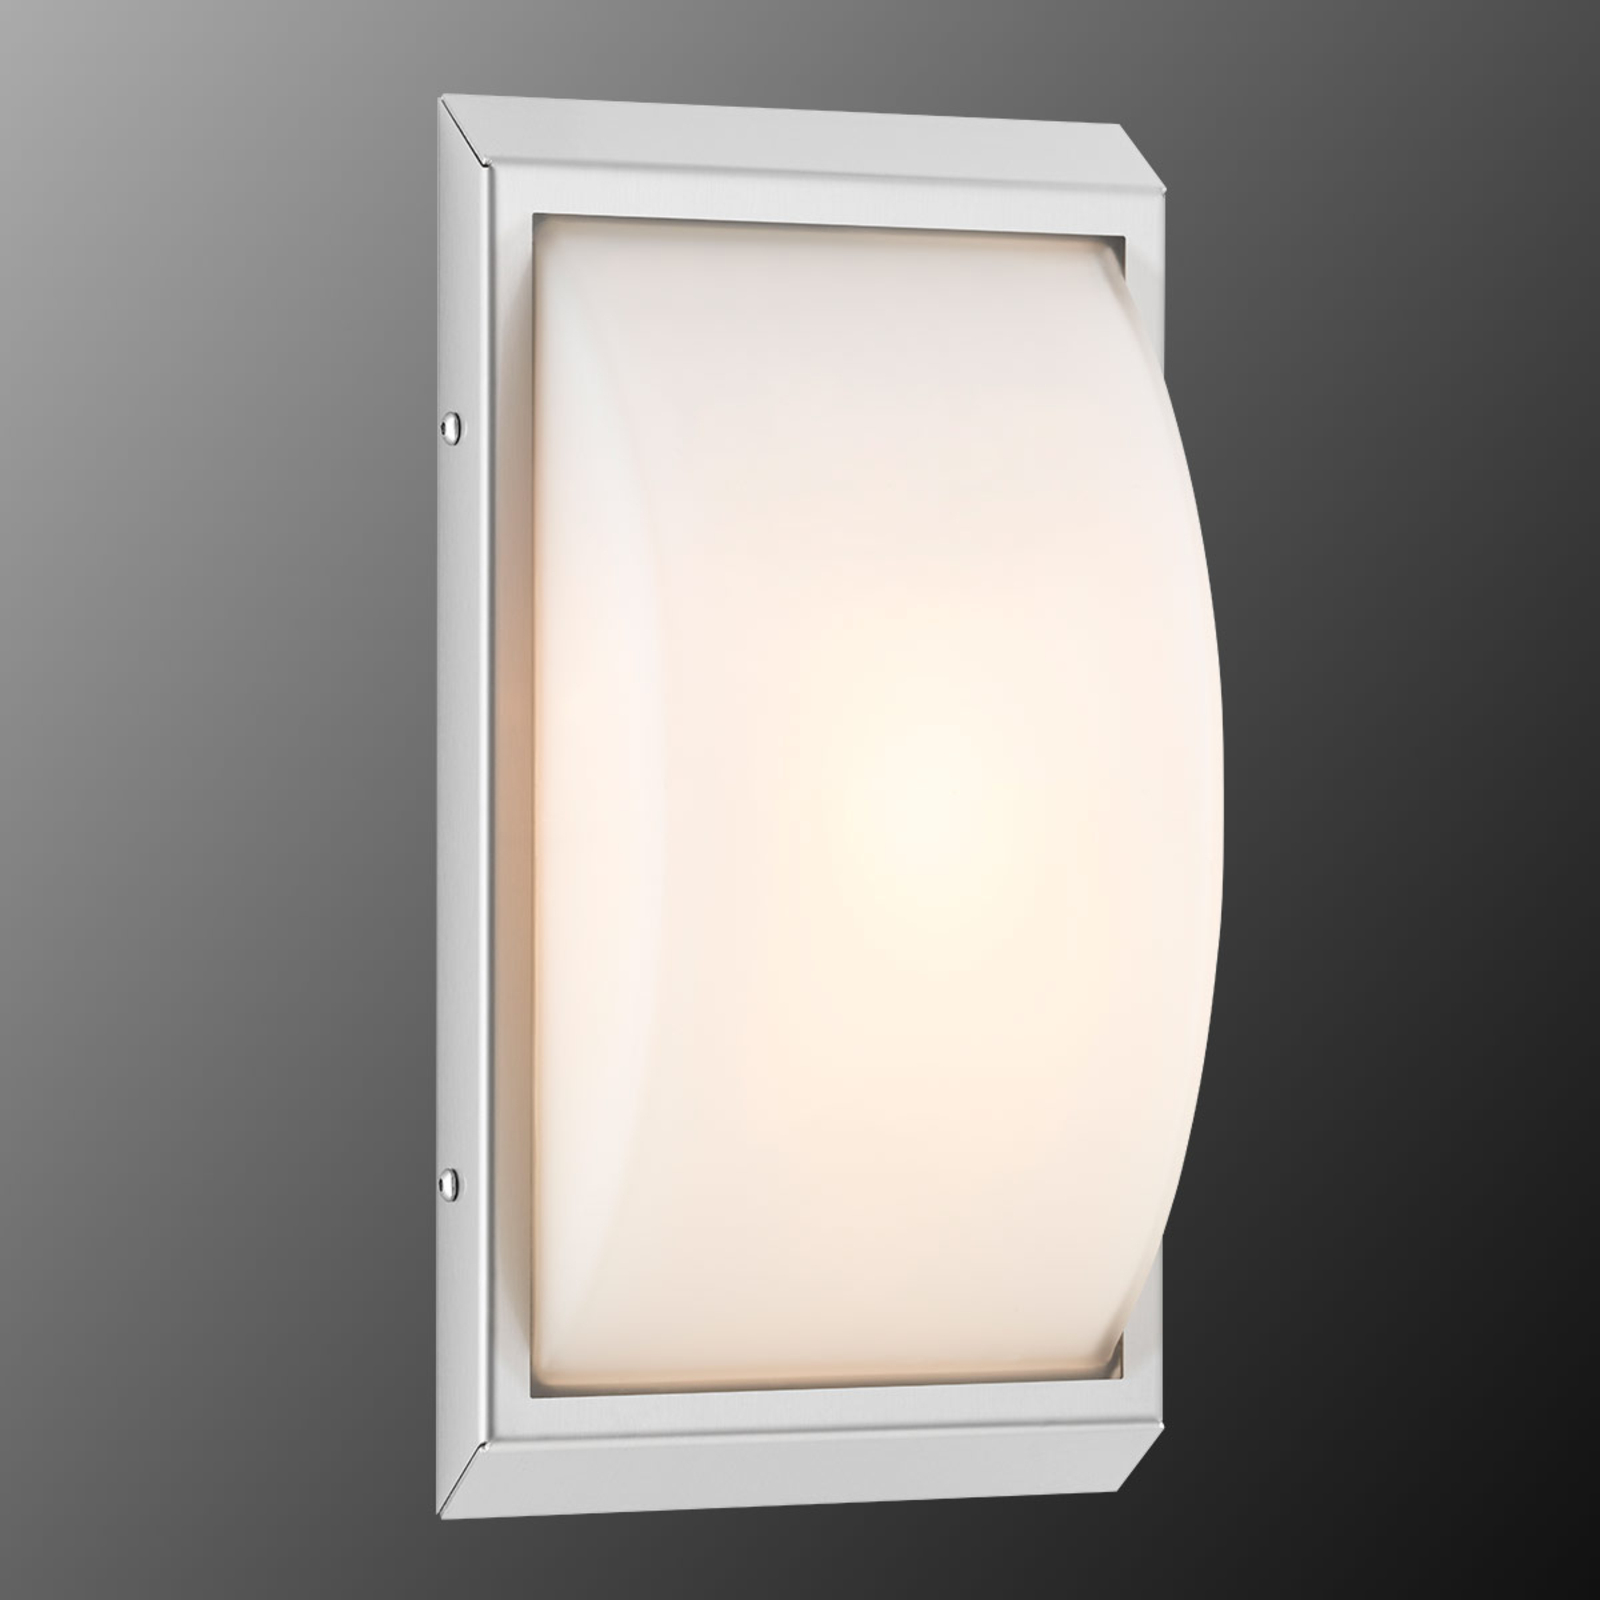 Outdoor wall light 052, white